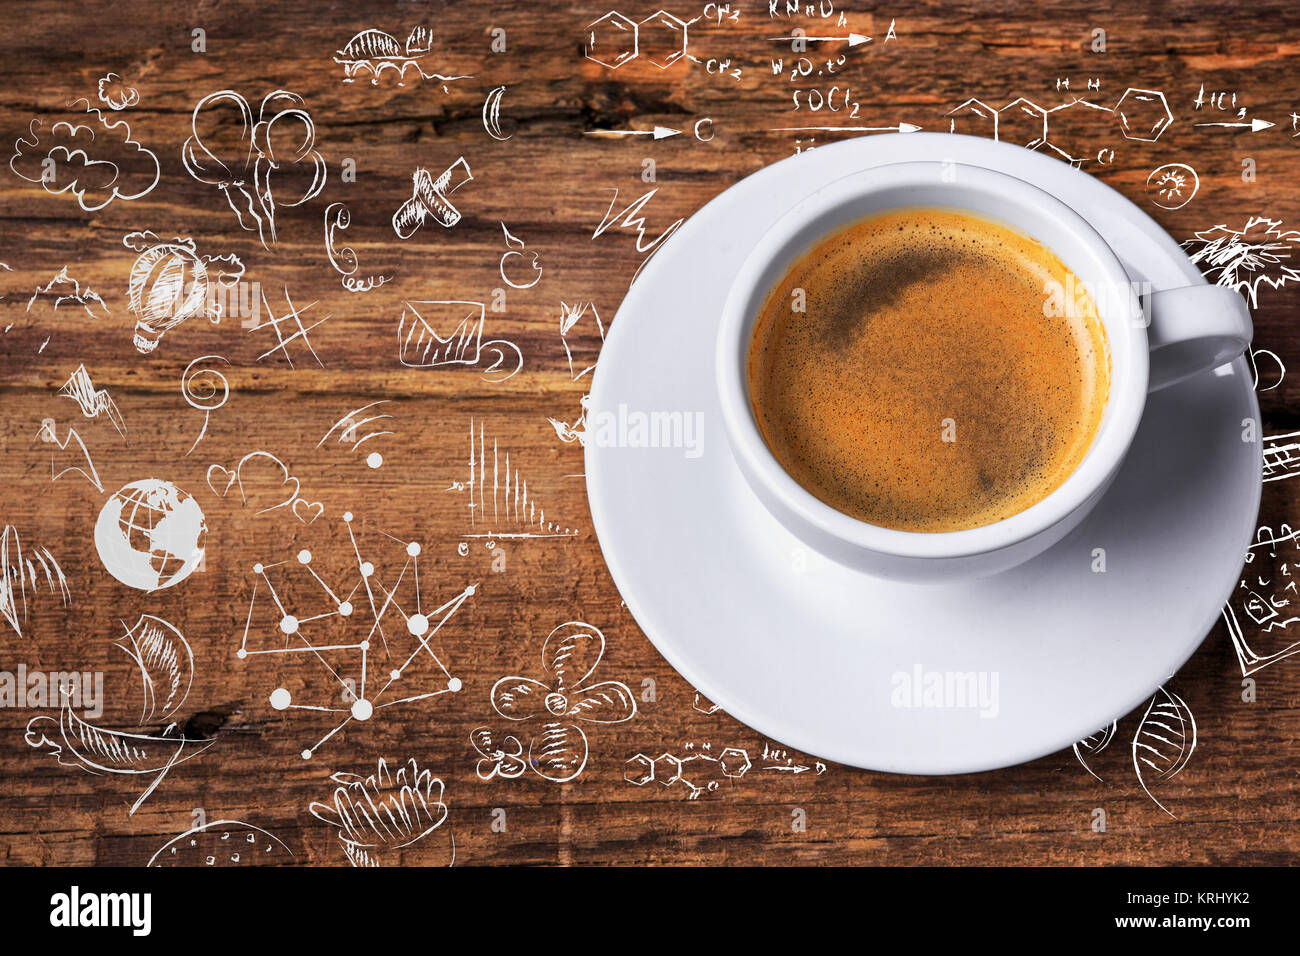 Coffee cup on a wooden table Stock Photo